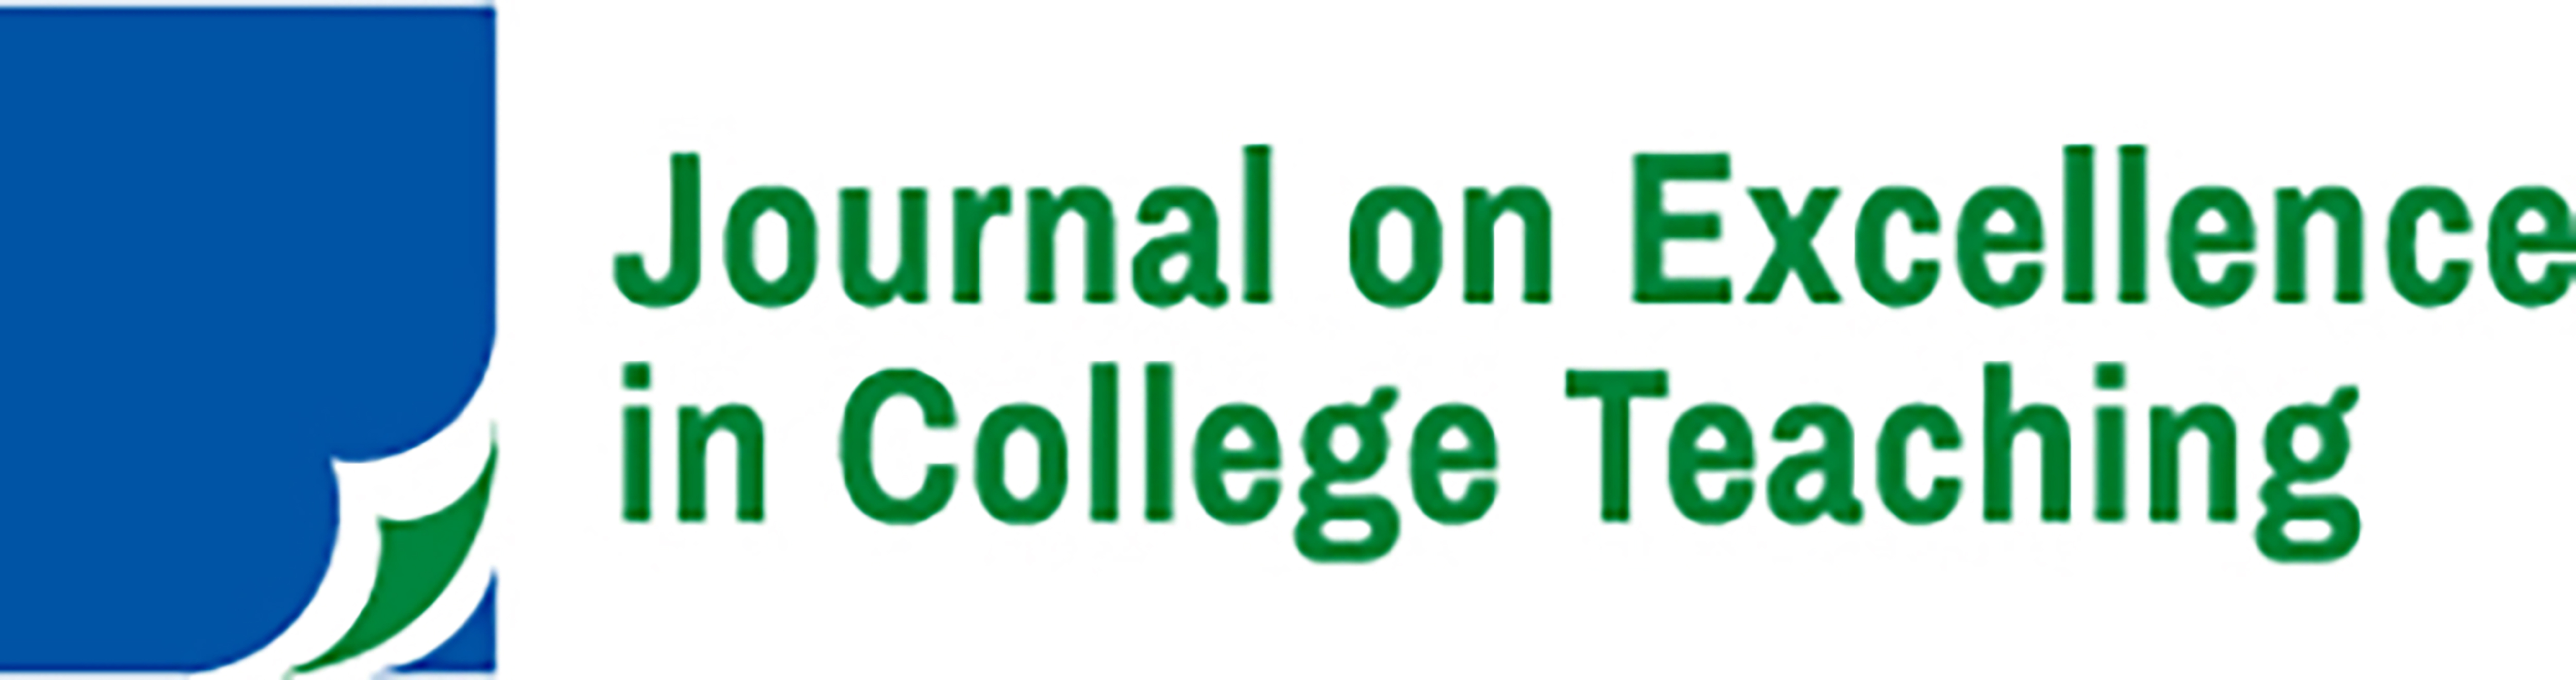 Journal on Excellence in College Teaching Logo